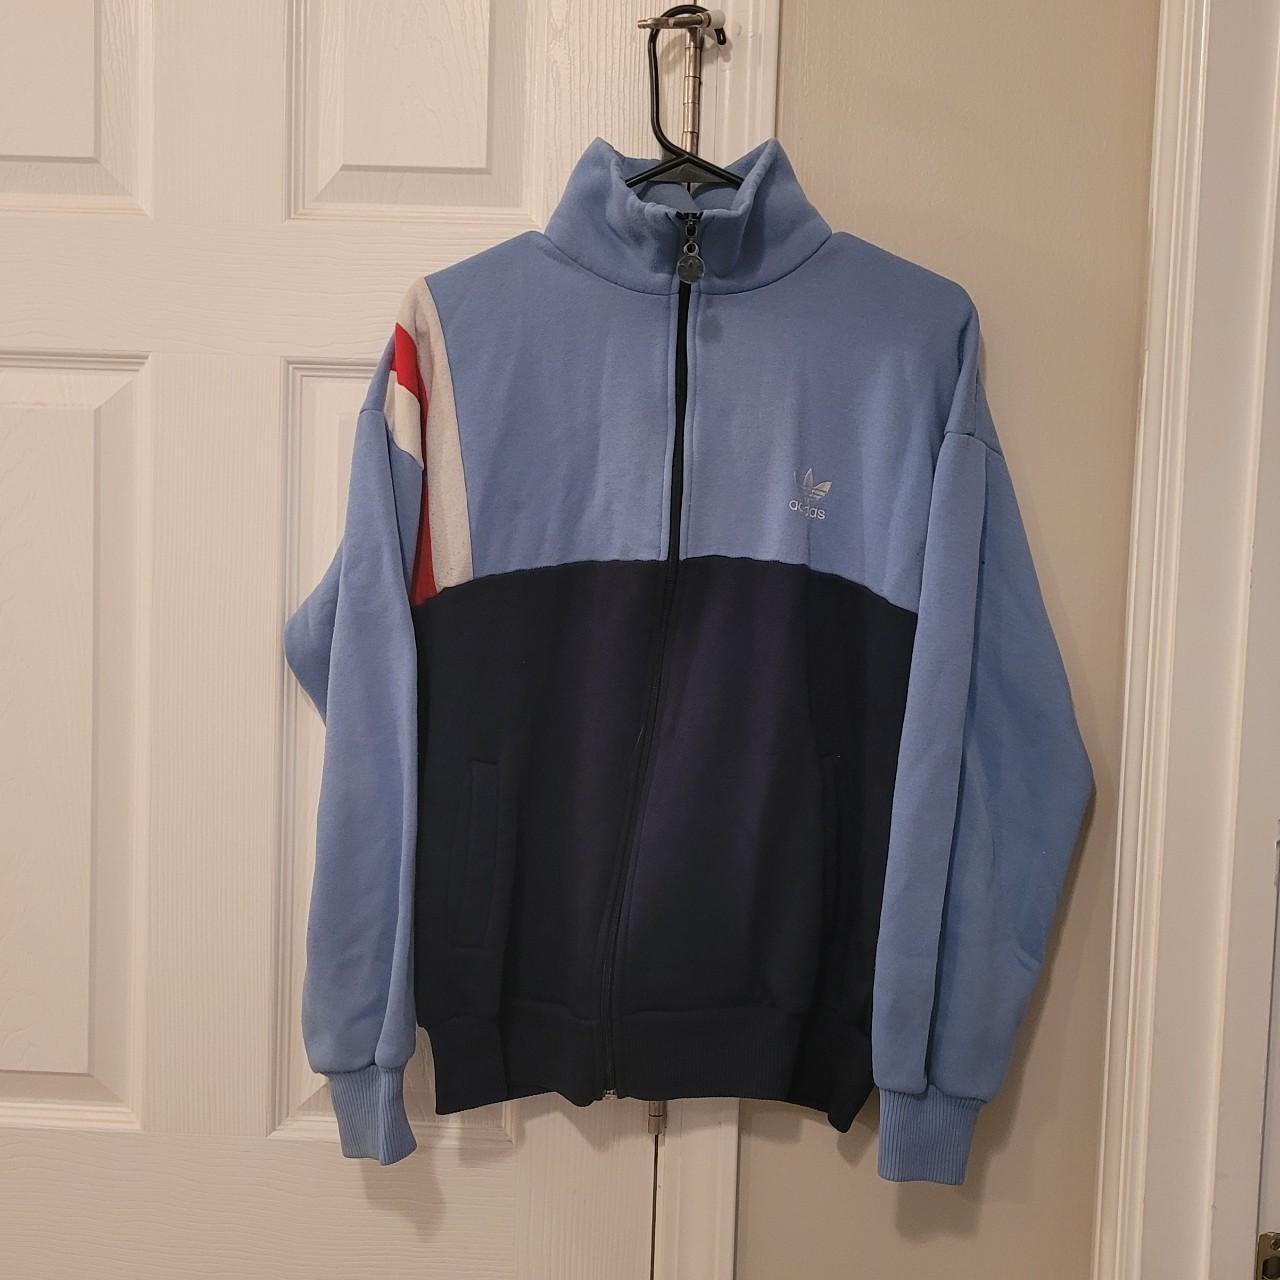 Adidas Men's White and Blue Hoodie